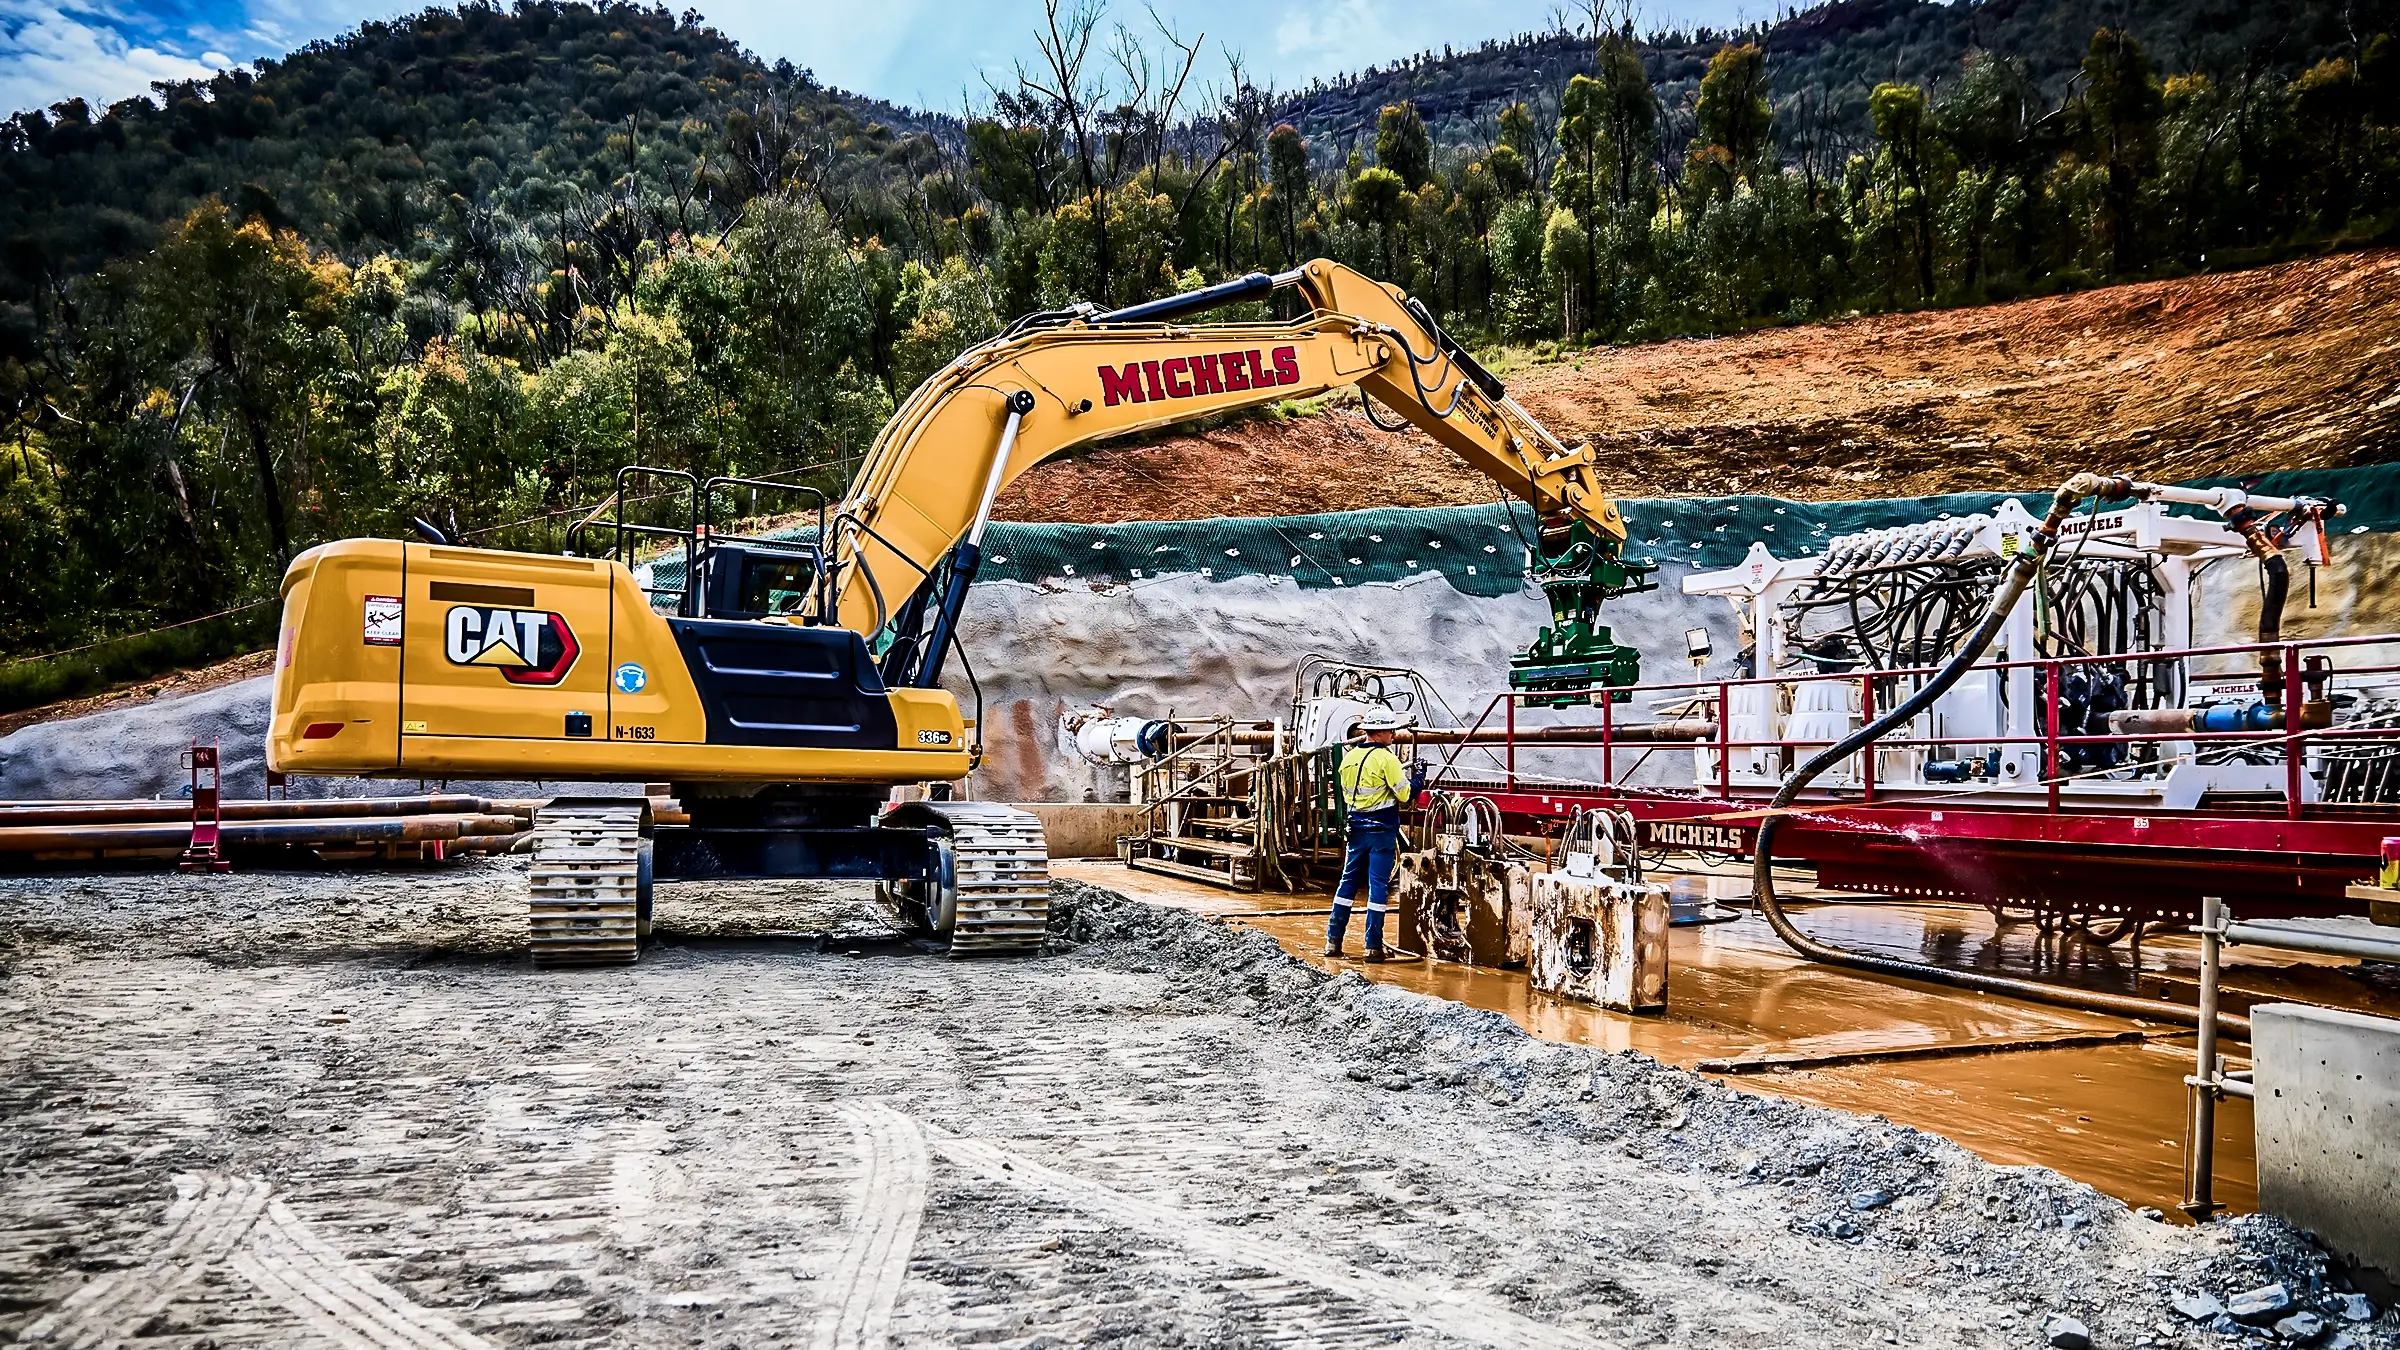 An HDD rig and excavator work side by side in a rural forested region of Australia.